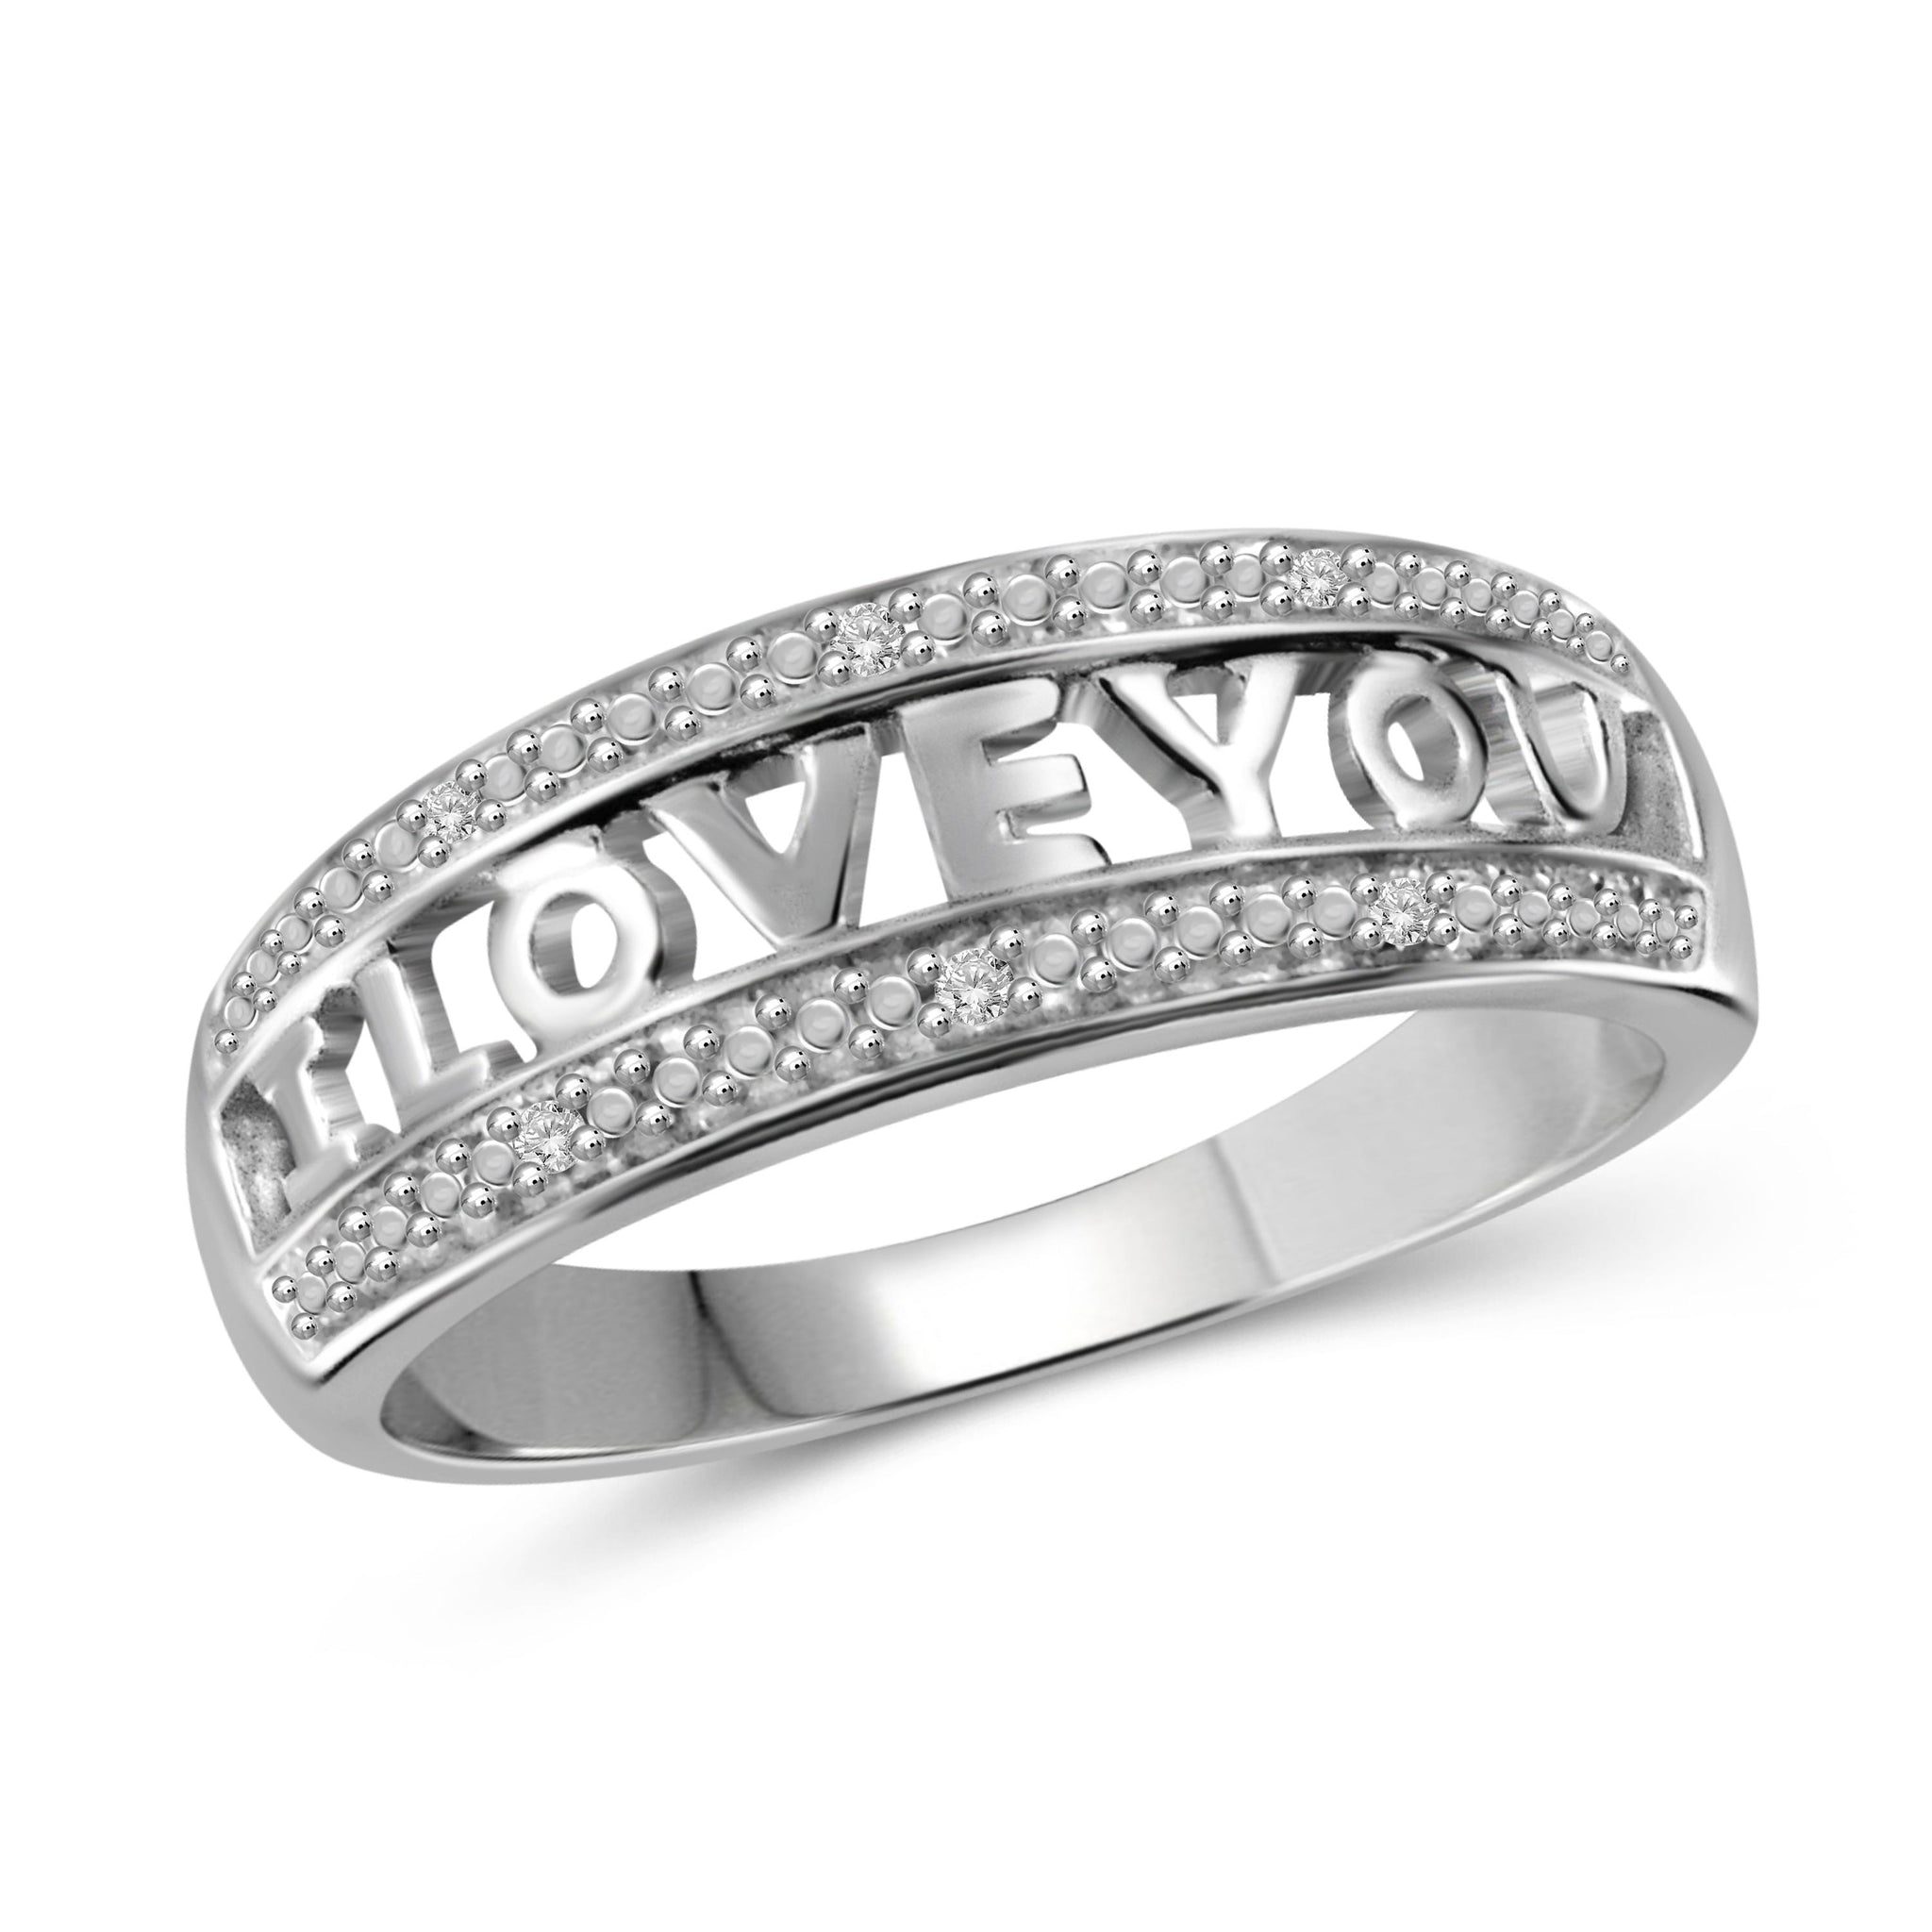 JewelonFire White Diamond Accent Sterling Silver I Love You Ring - Assorted Colors